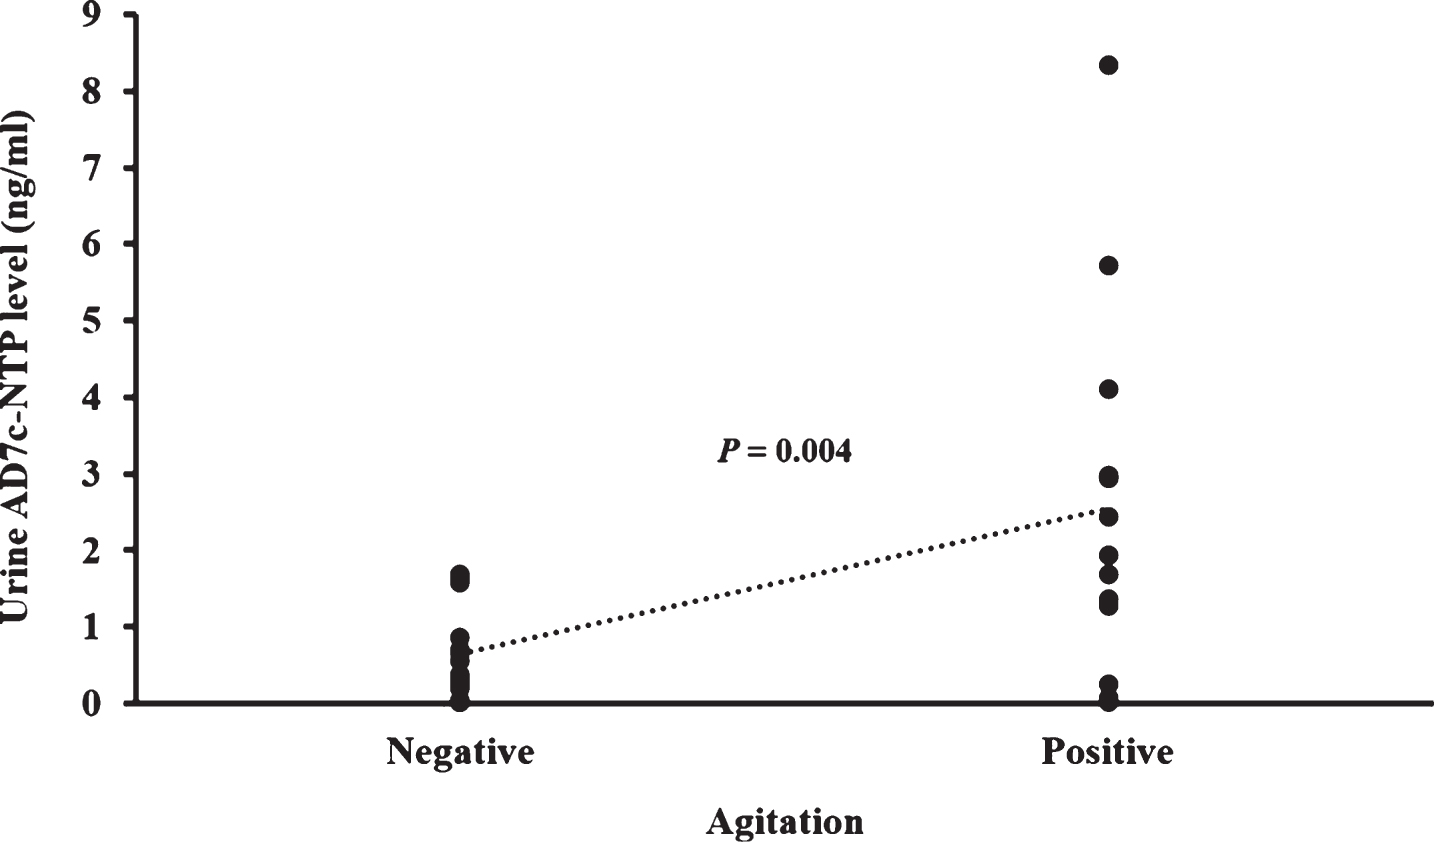 Difference of AD7c-NTP level between subjects with agitation and subjects without agitation. Agitation with score of 2 or more in NPI was considered as a reliable symptom. Using this cutoff value, participants were divided into agitation positive group and agitation negative group. The urine AD7c-NTP levels are 2.54±2.39 ng/ml in agitation positive subjects (n = 13) and 0.65±0.61 ng/ml in agitation negative subjects (n = 17).